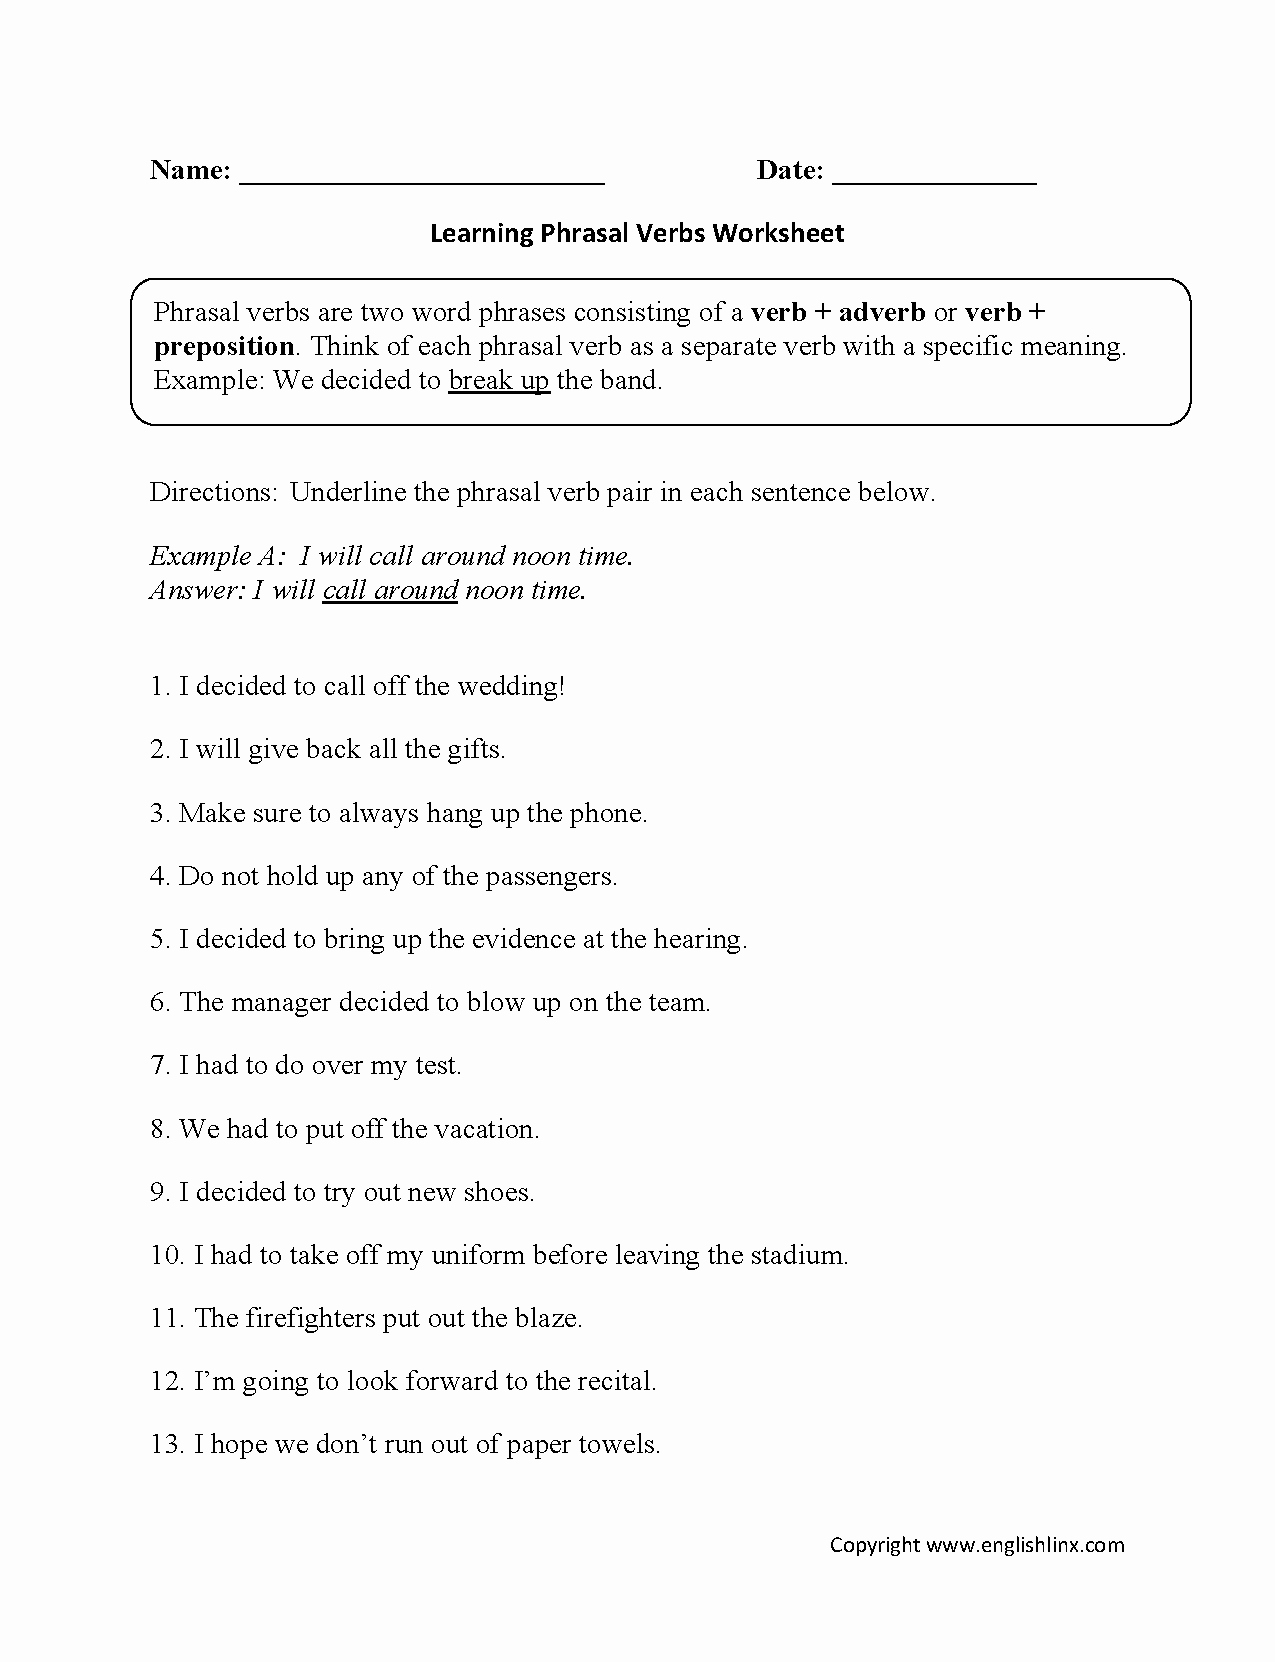 Verbs Worksheets for Middle School Inspirational Englishlinx